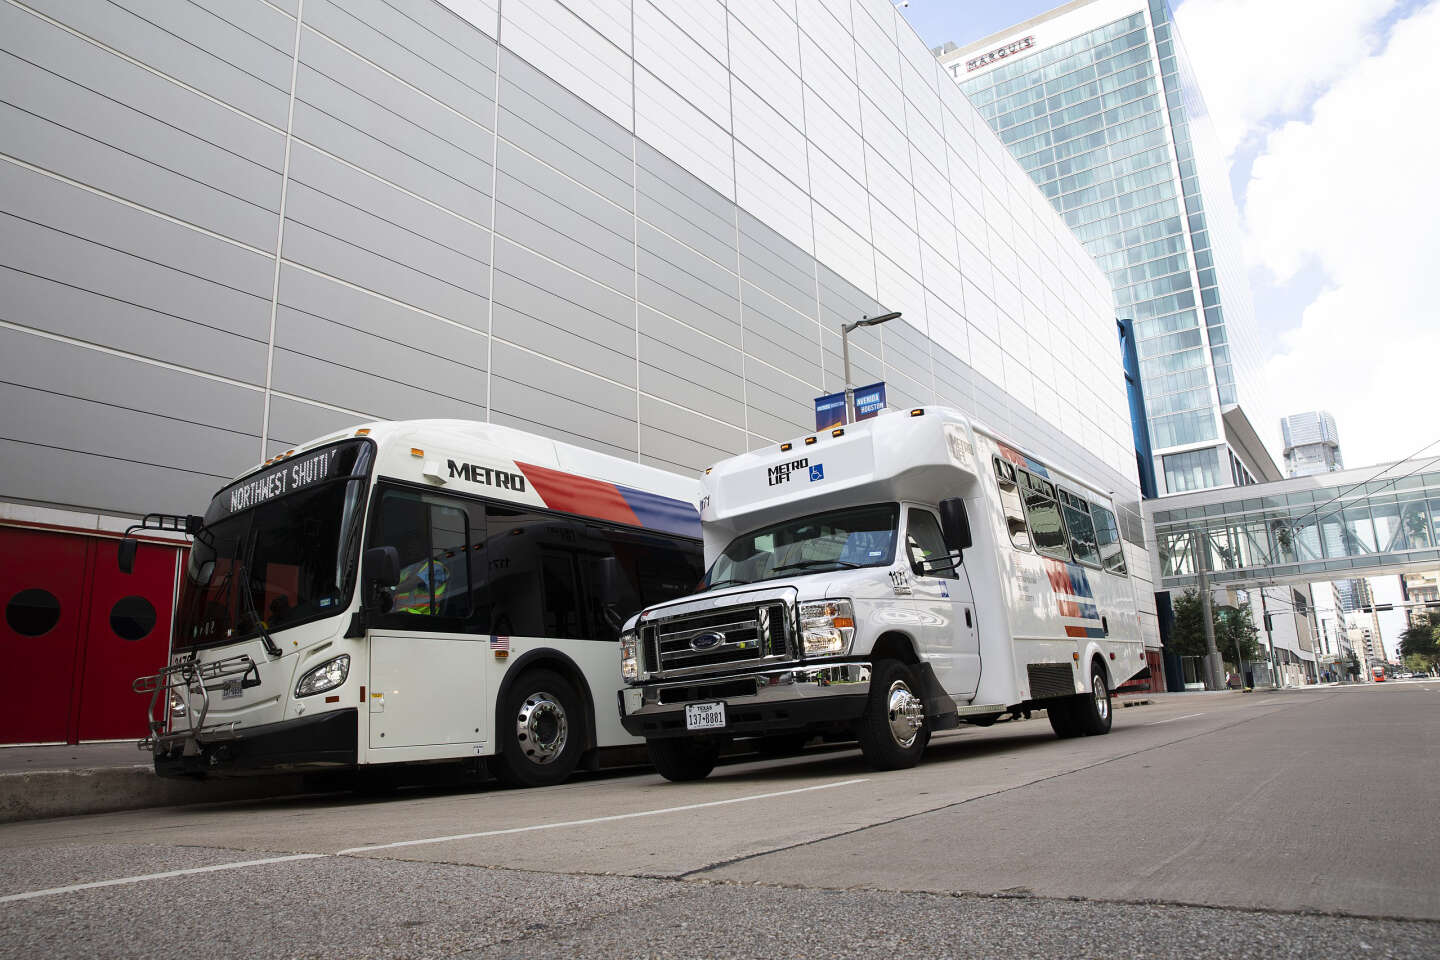 Transdev consoles itself in the United States by buying First Transit, after a failure in France